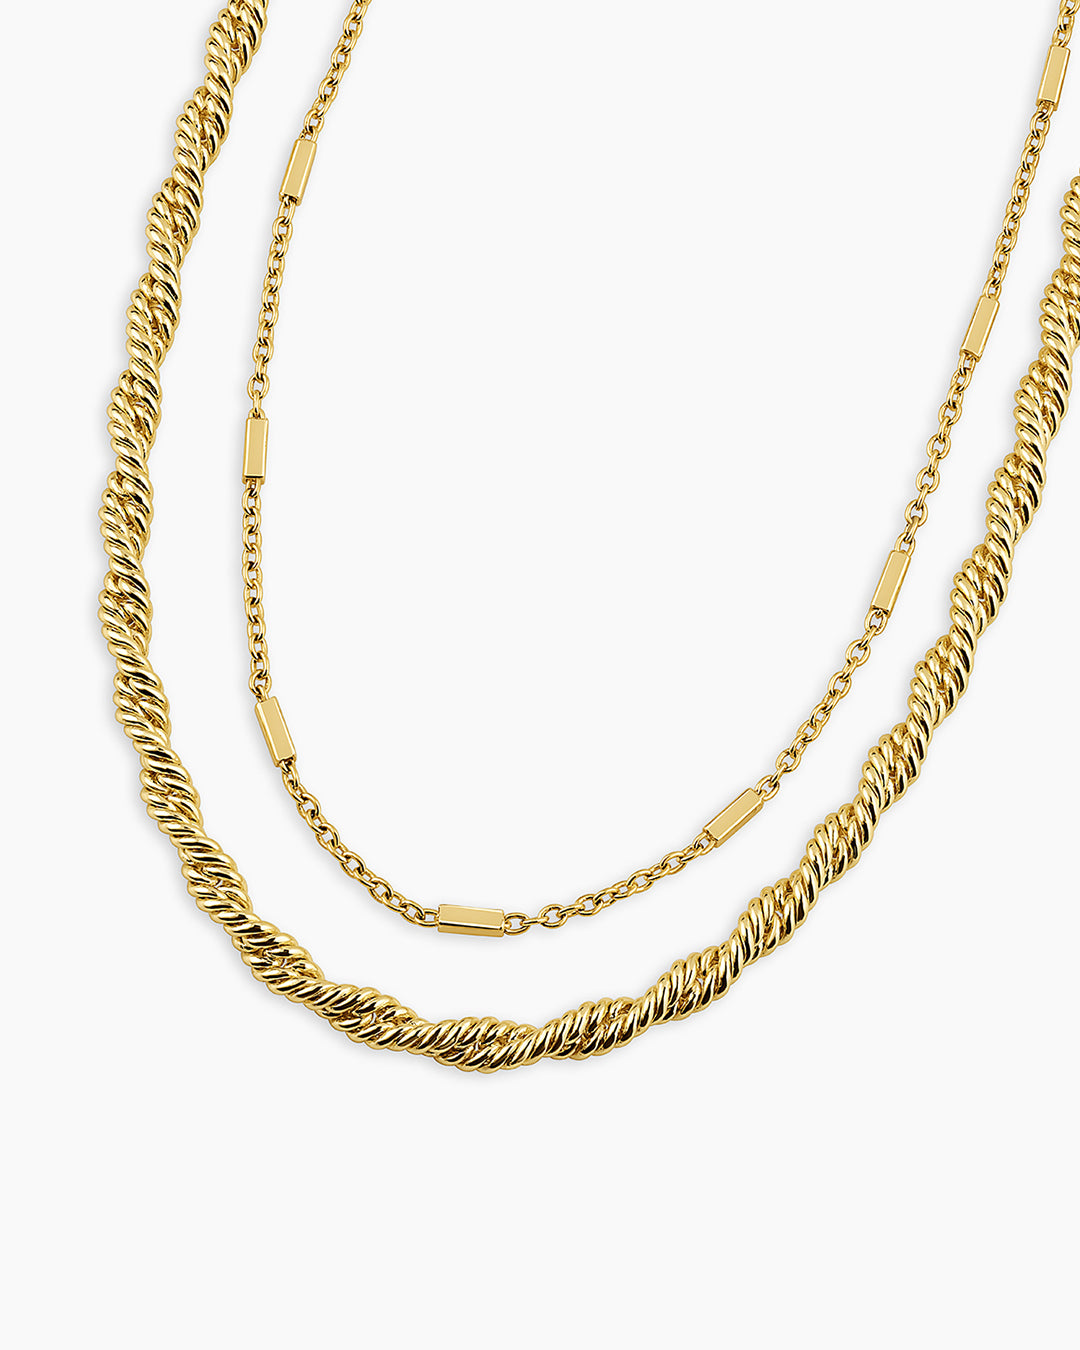 Build a 3 piece layered necklace set – Champagne on a Wednesday